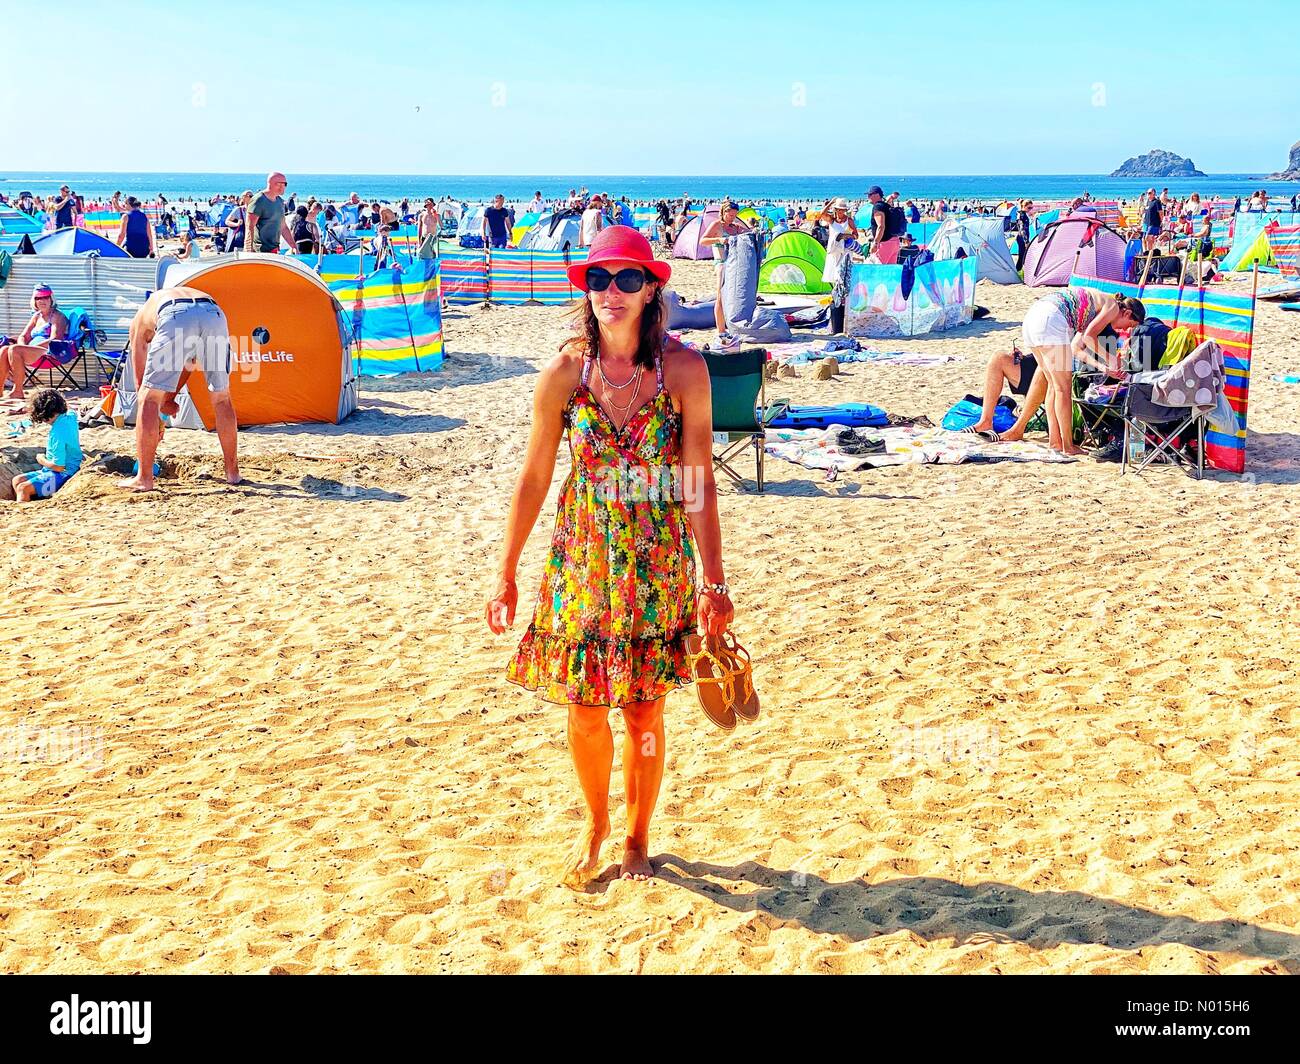 UK Weather: Raich Keene in glorious sunshine on crowded Polzeath beach despite Covid warnings at start of the bank holiday weekend in Cornwall, UK. 27th August, 2021. Credit nidpor/Alamy Live News Credit: nidpor/StockimoNews/Alamy Live News Stock Photo